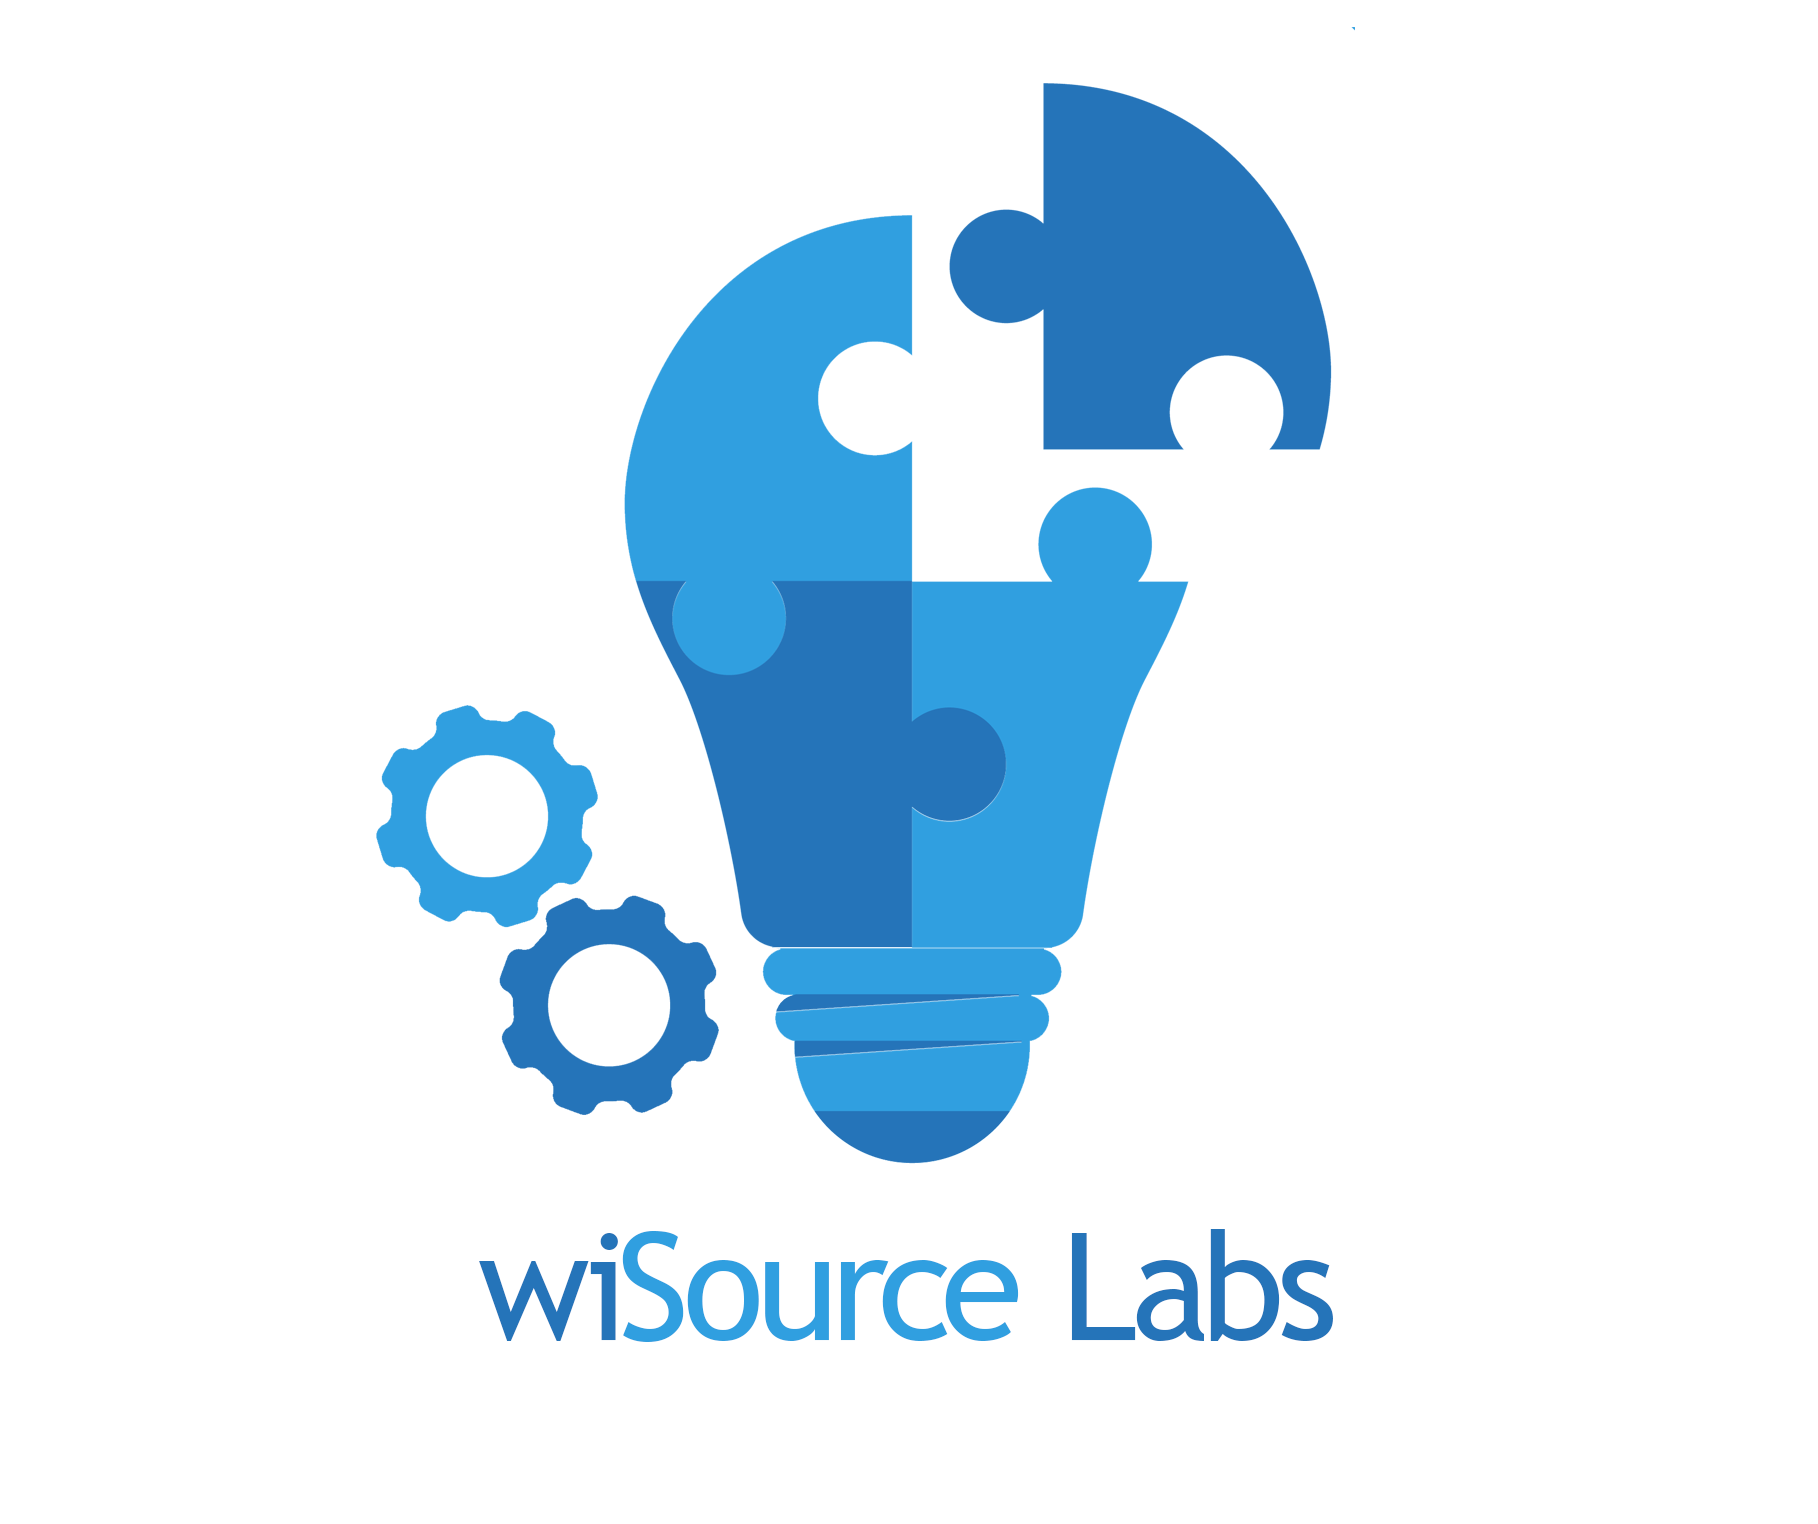 The wiSource Labs